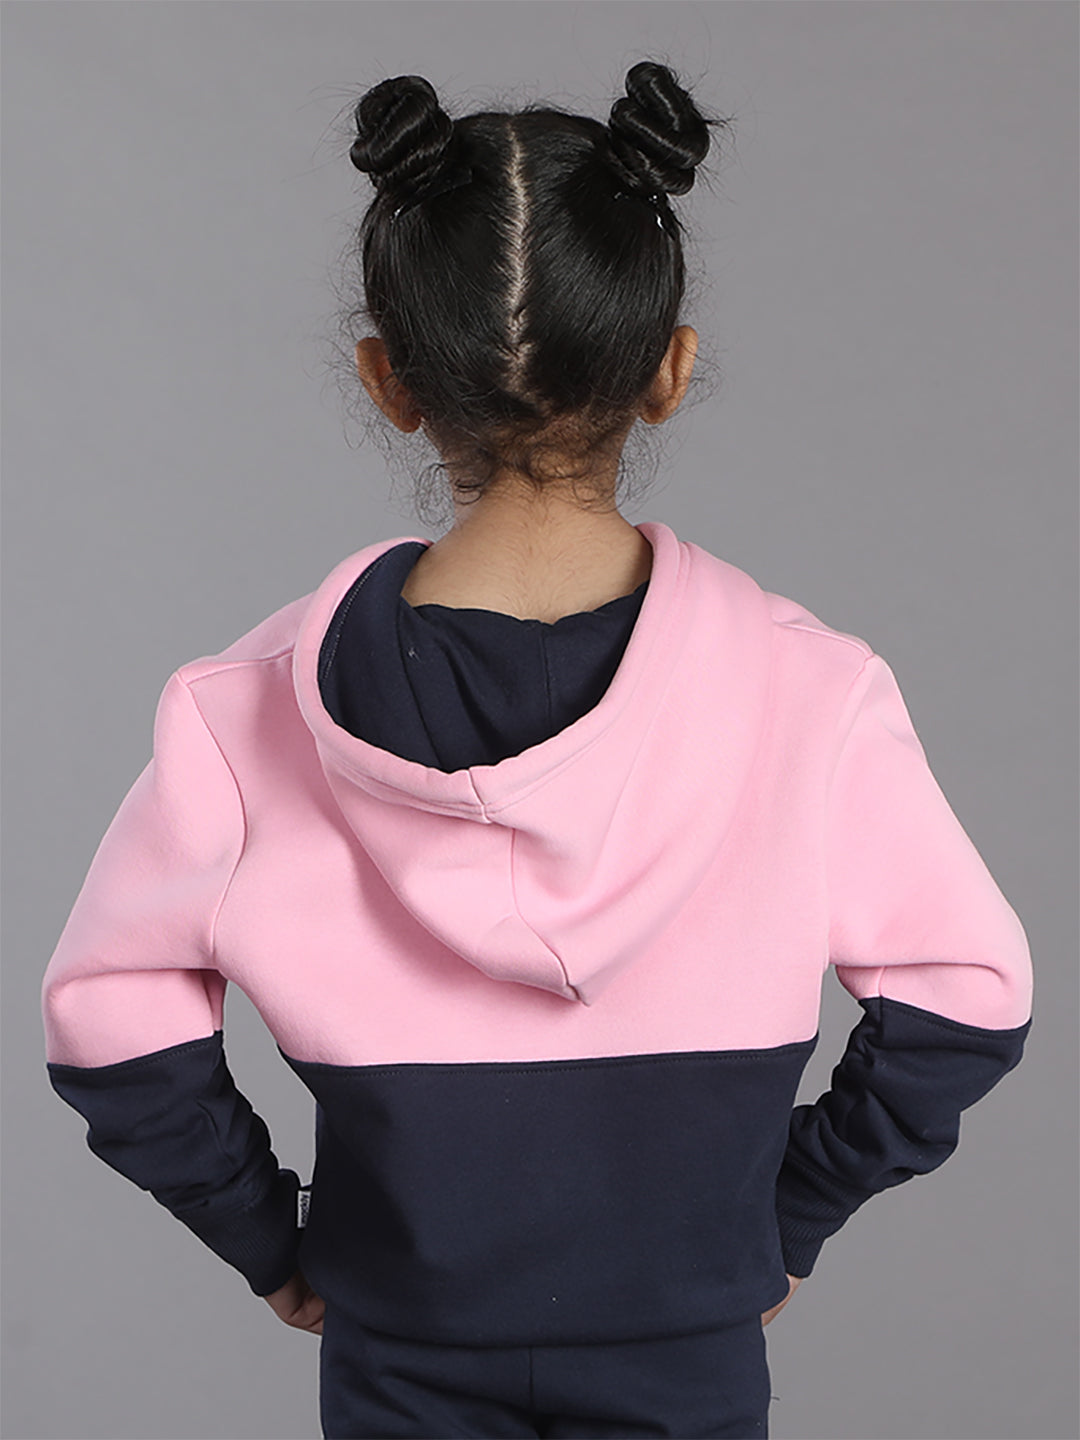 Girls Colorblocked Cut and Sew zipper hoodie